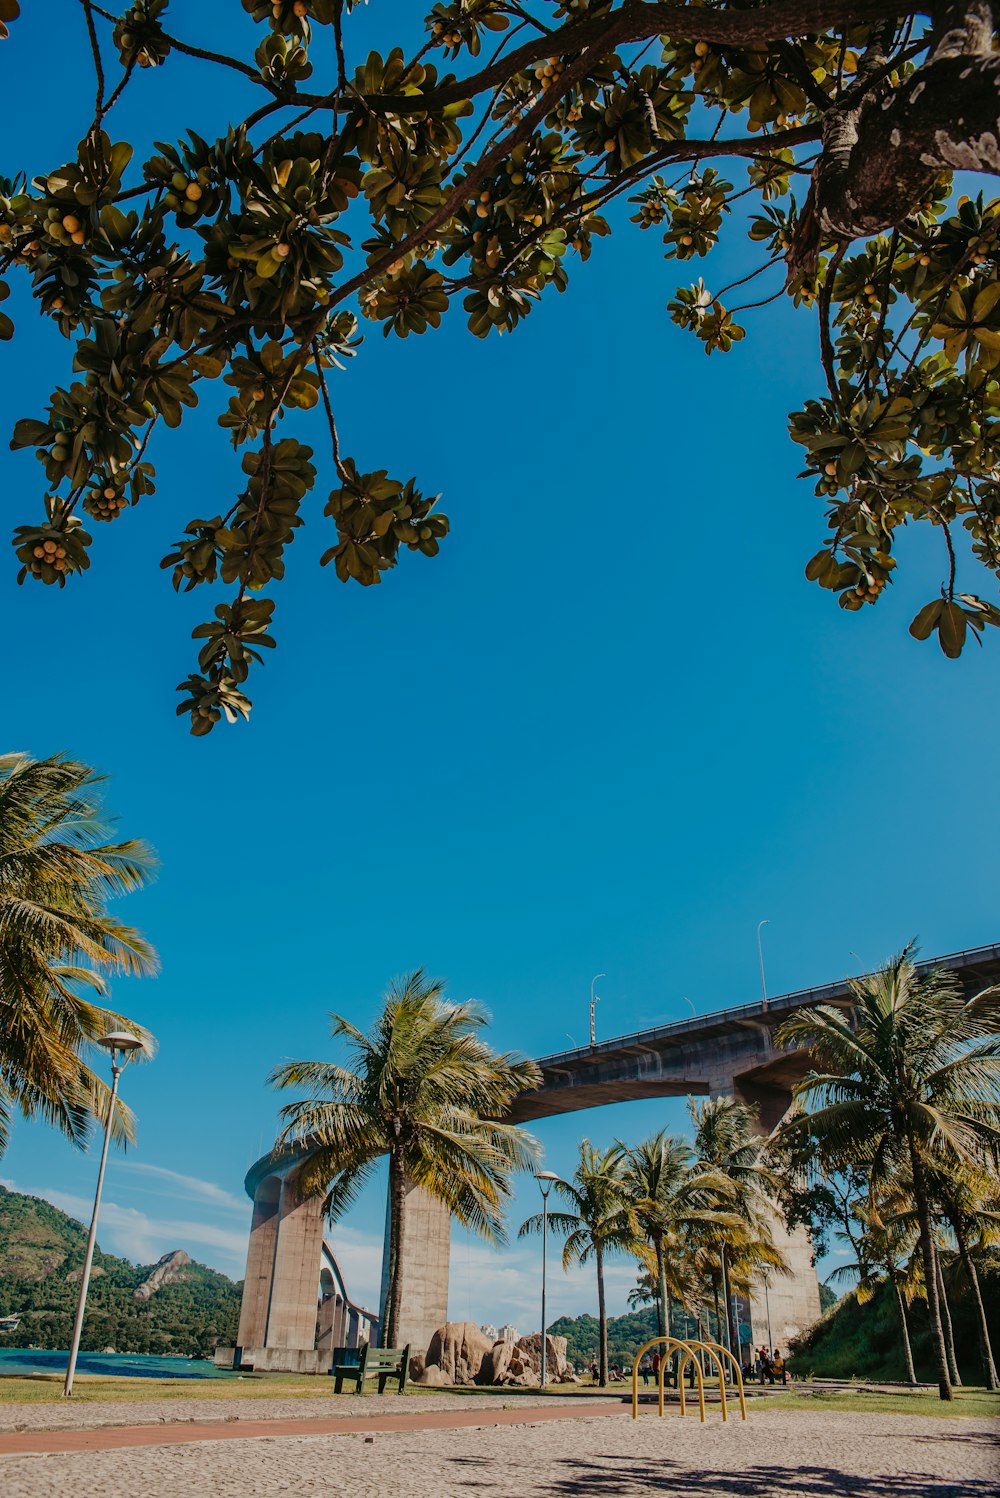 a bridge over a body of water surrounded by palm trees